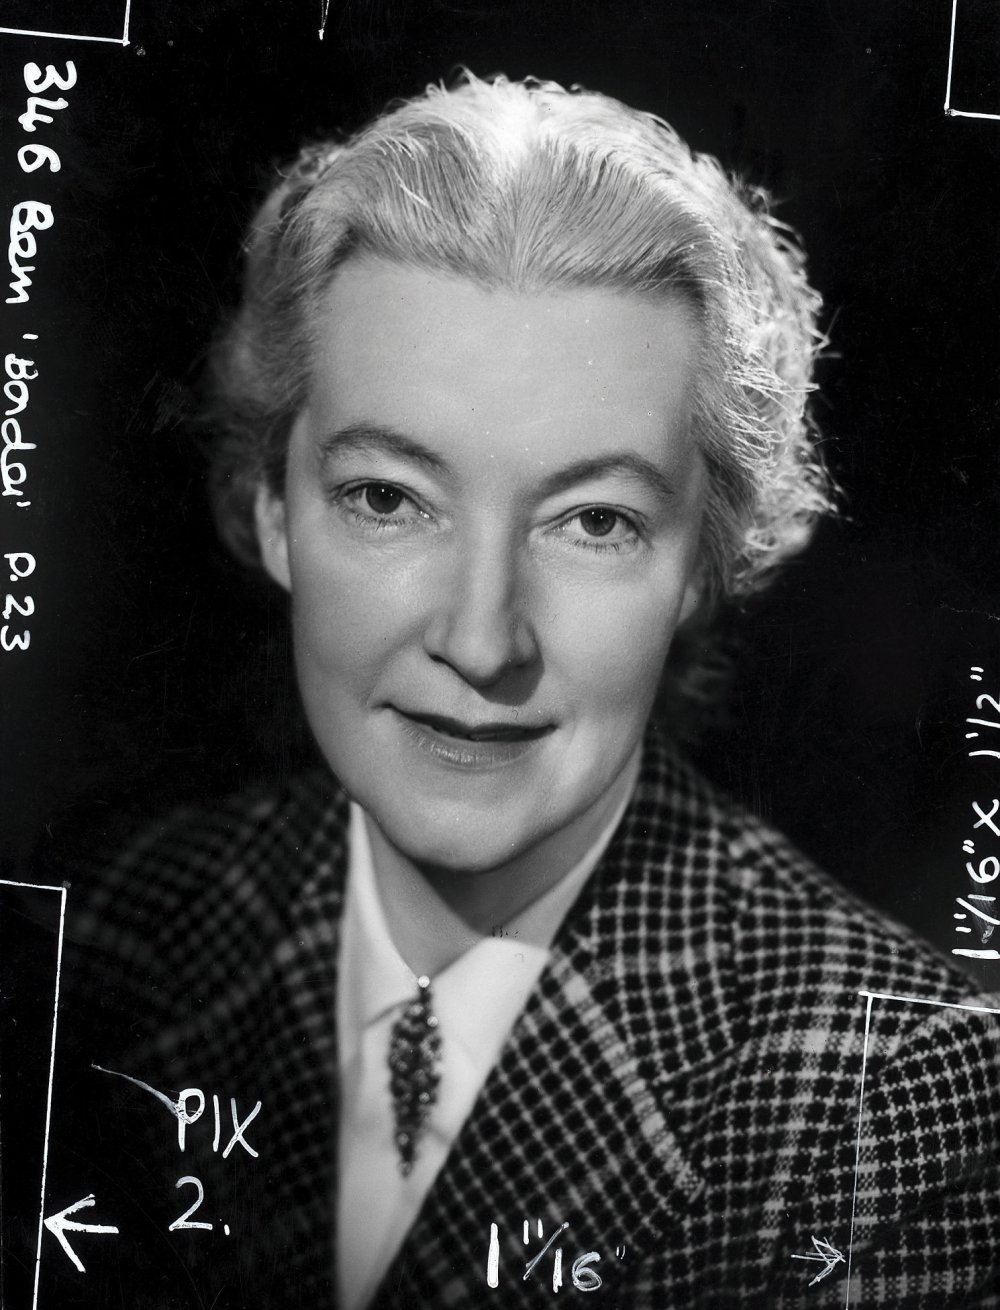 Critic Dilys Powell